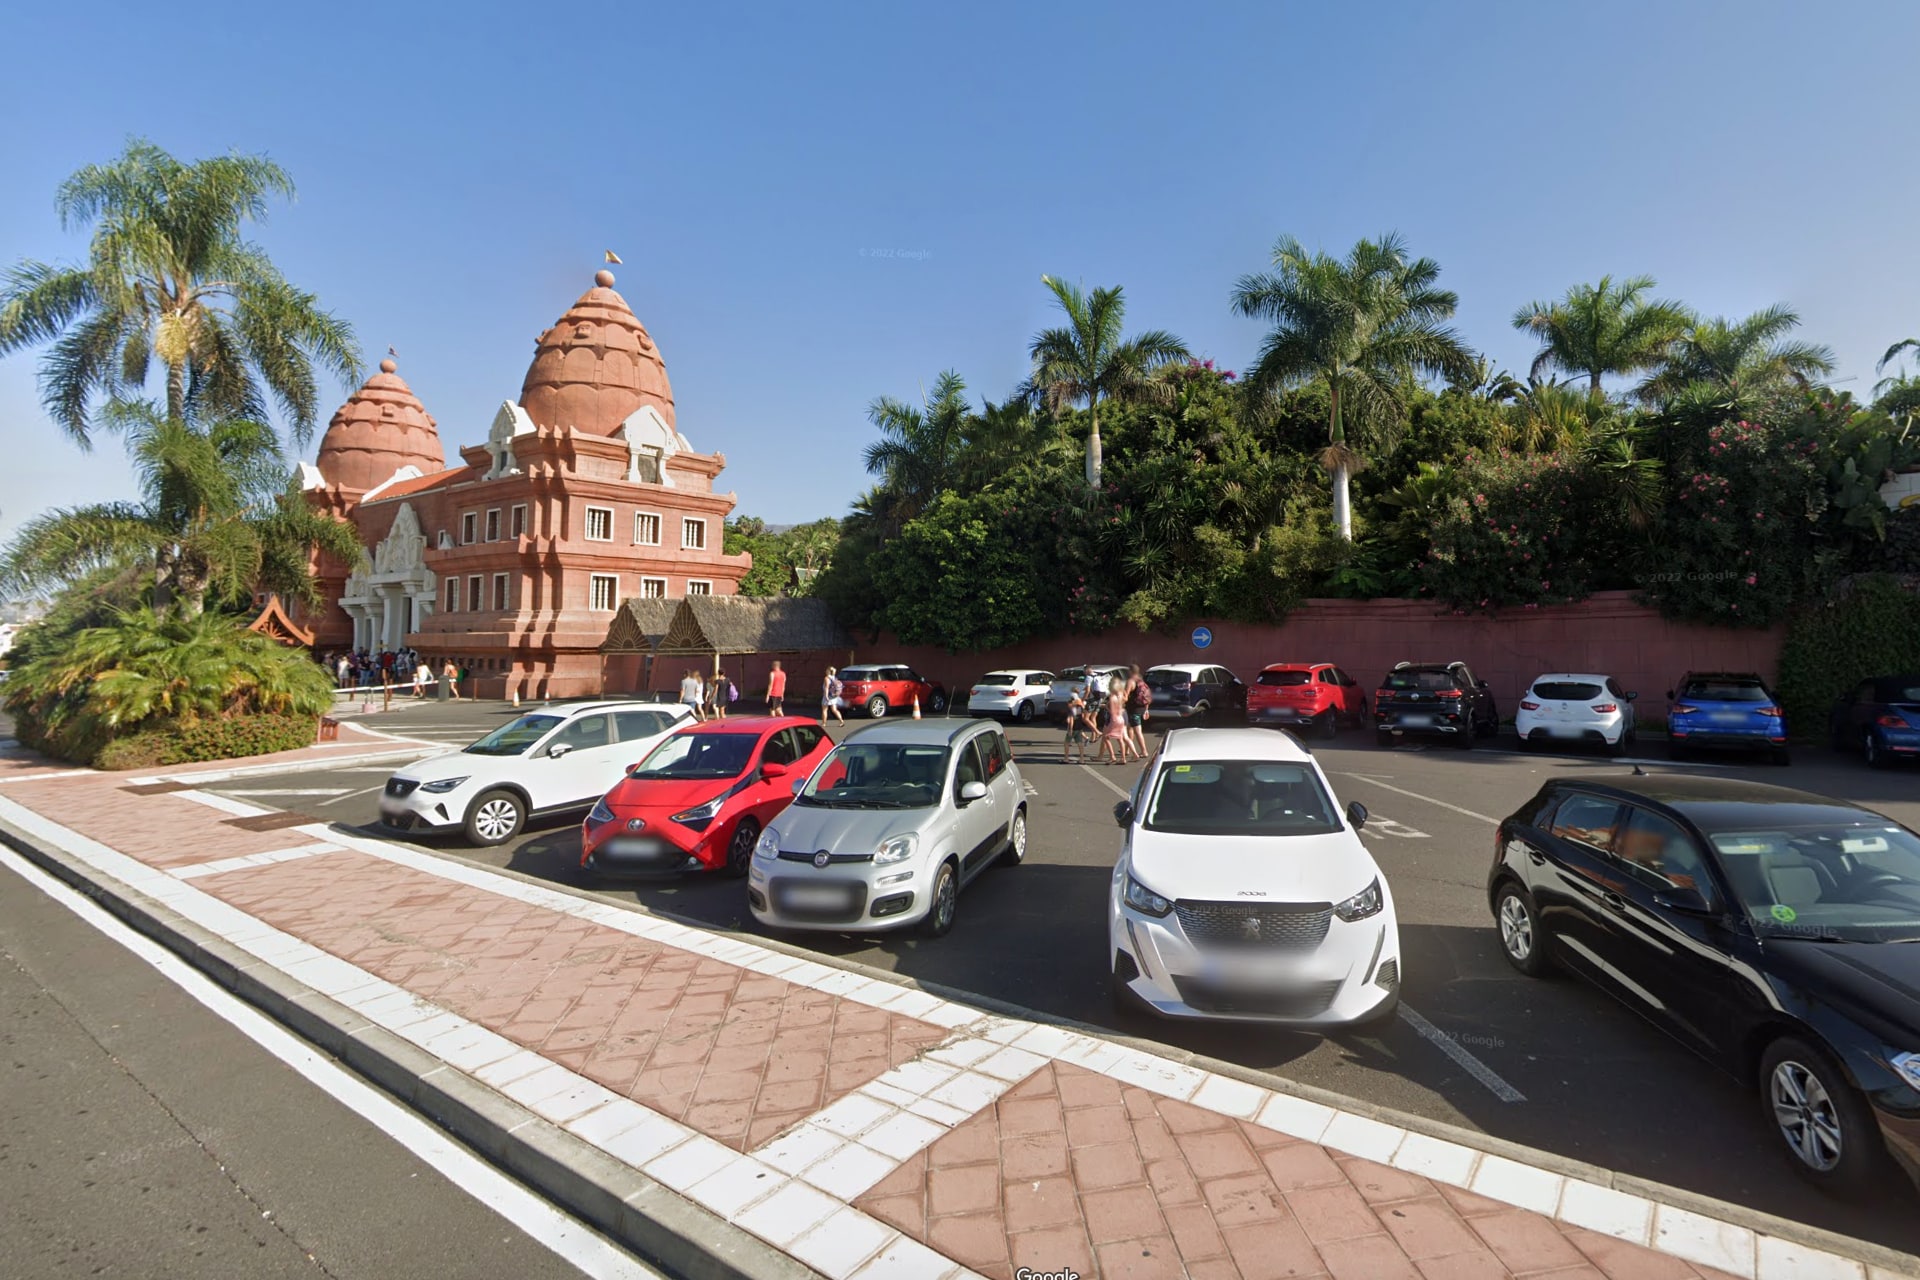 Spacious parking area at Siam Park, Tenerife, providing convenient parking options for visitors to the water park